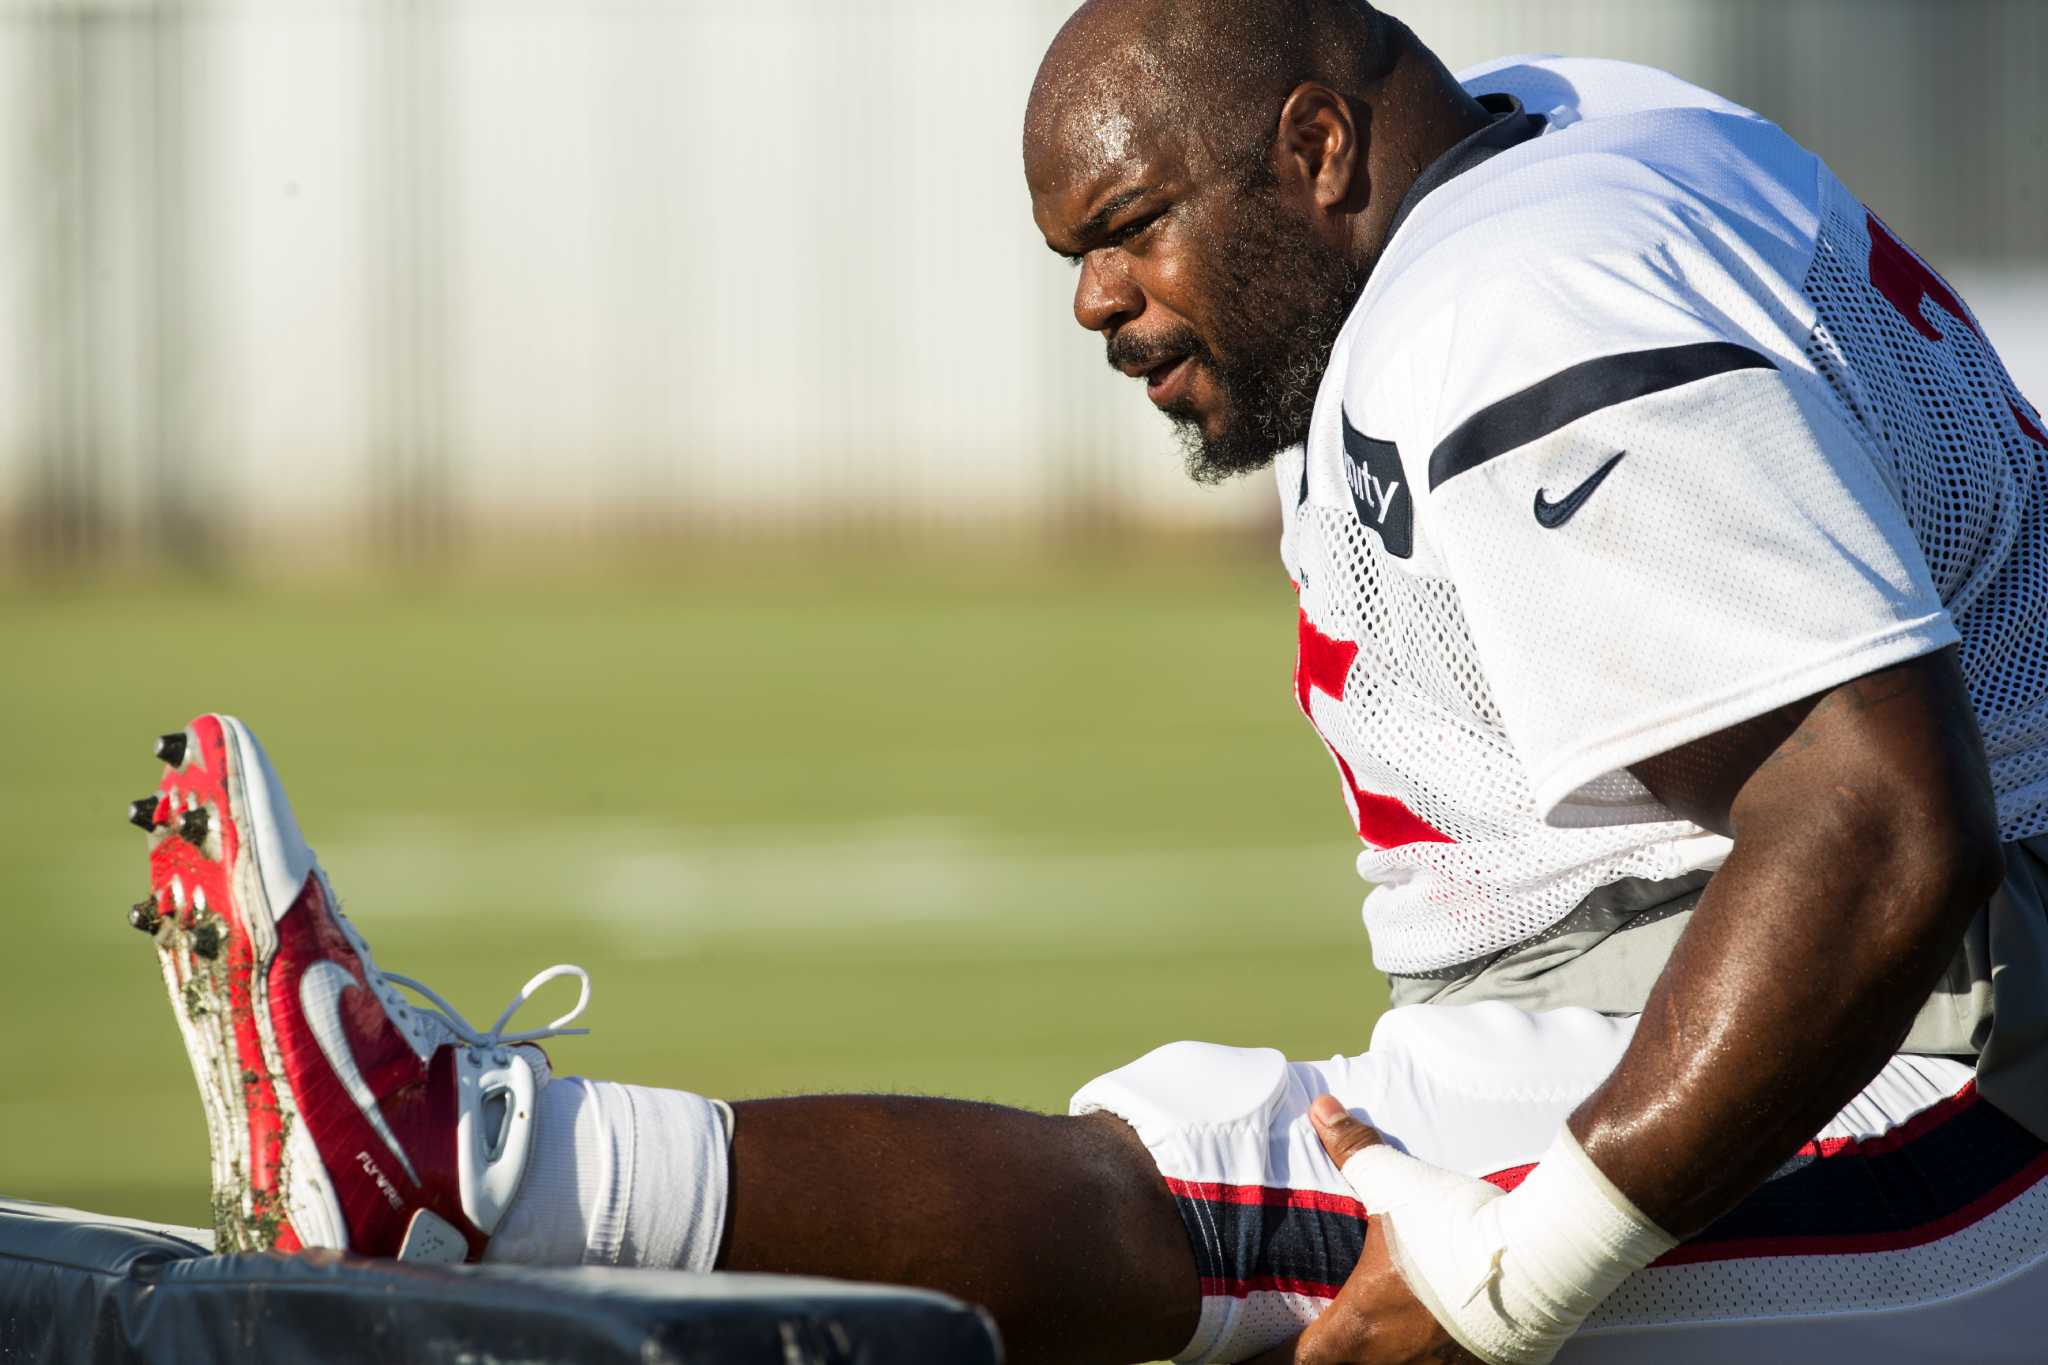 Houston, TX, USA. 03rd Aug, 2015. Houston Texans nose tackle Vince Wilfork  (75) during evening practice at Houston Texans training camp from the  Methodist Training Center at NRG Stadium in Houston, TX.